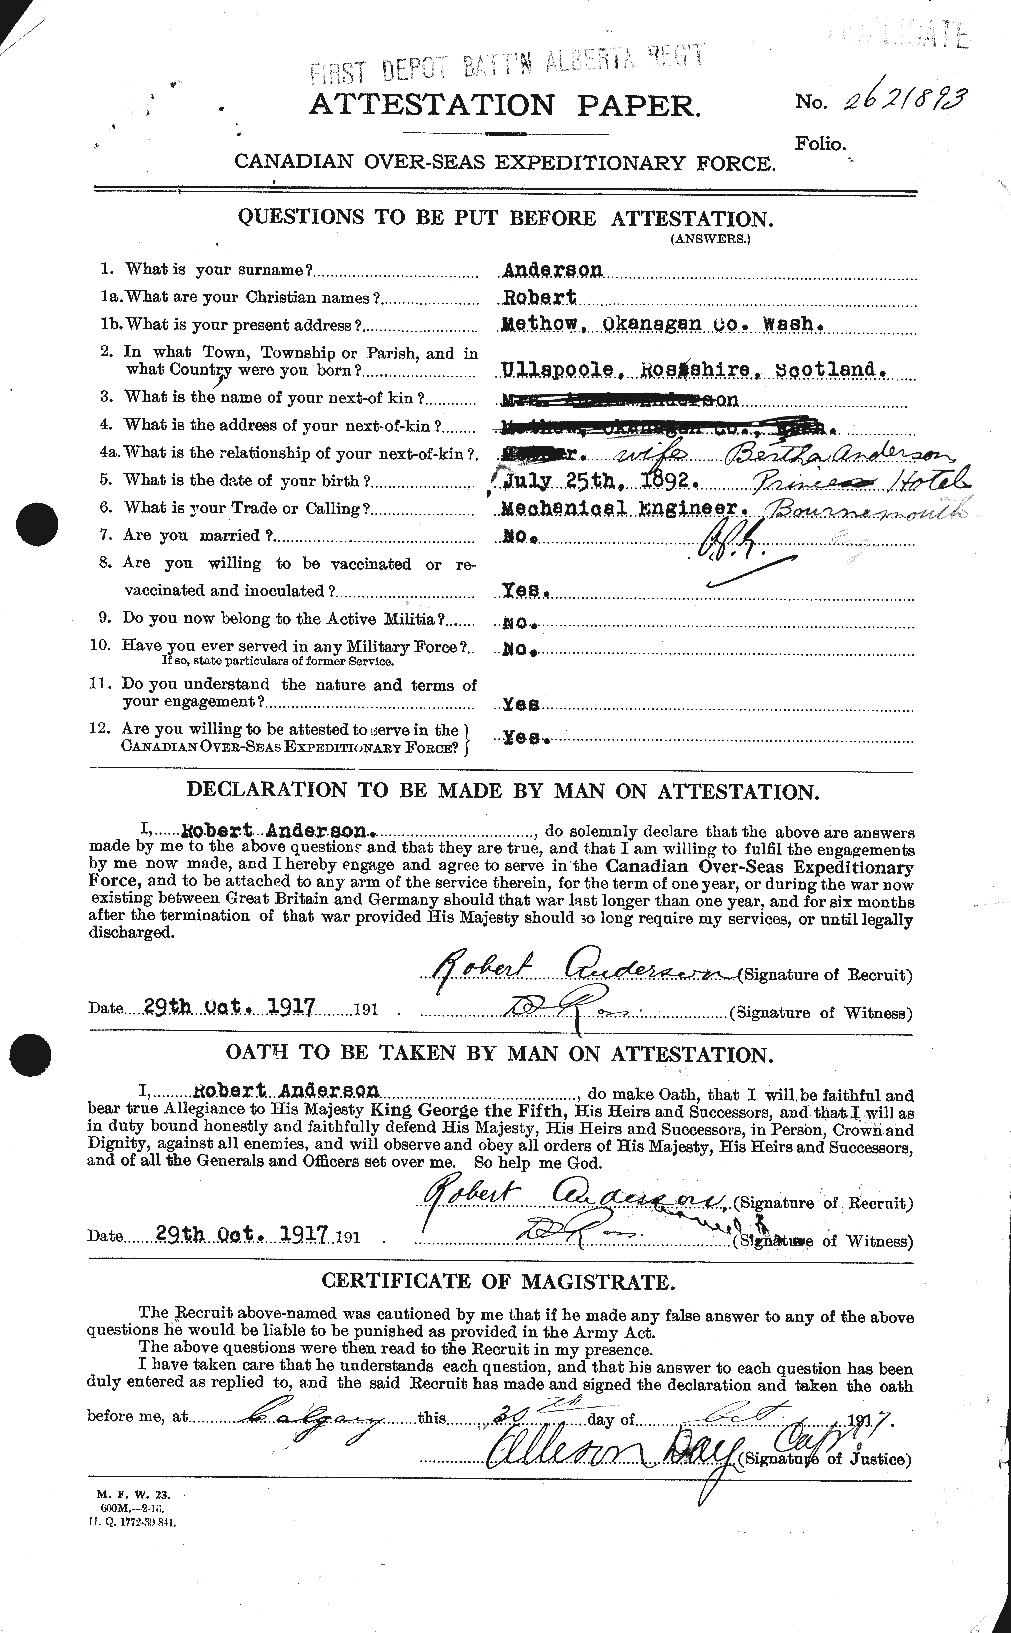 Personnel Records of the First World War - CEF 207276a